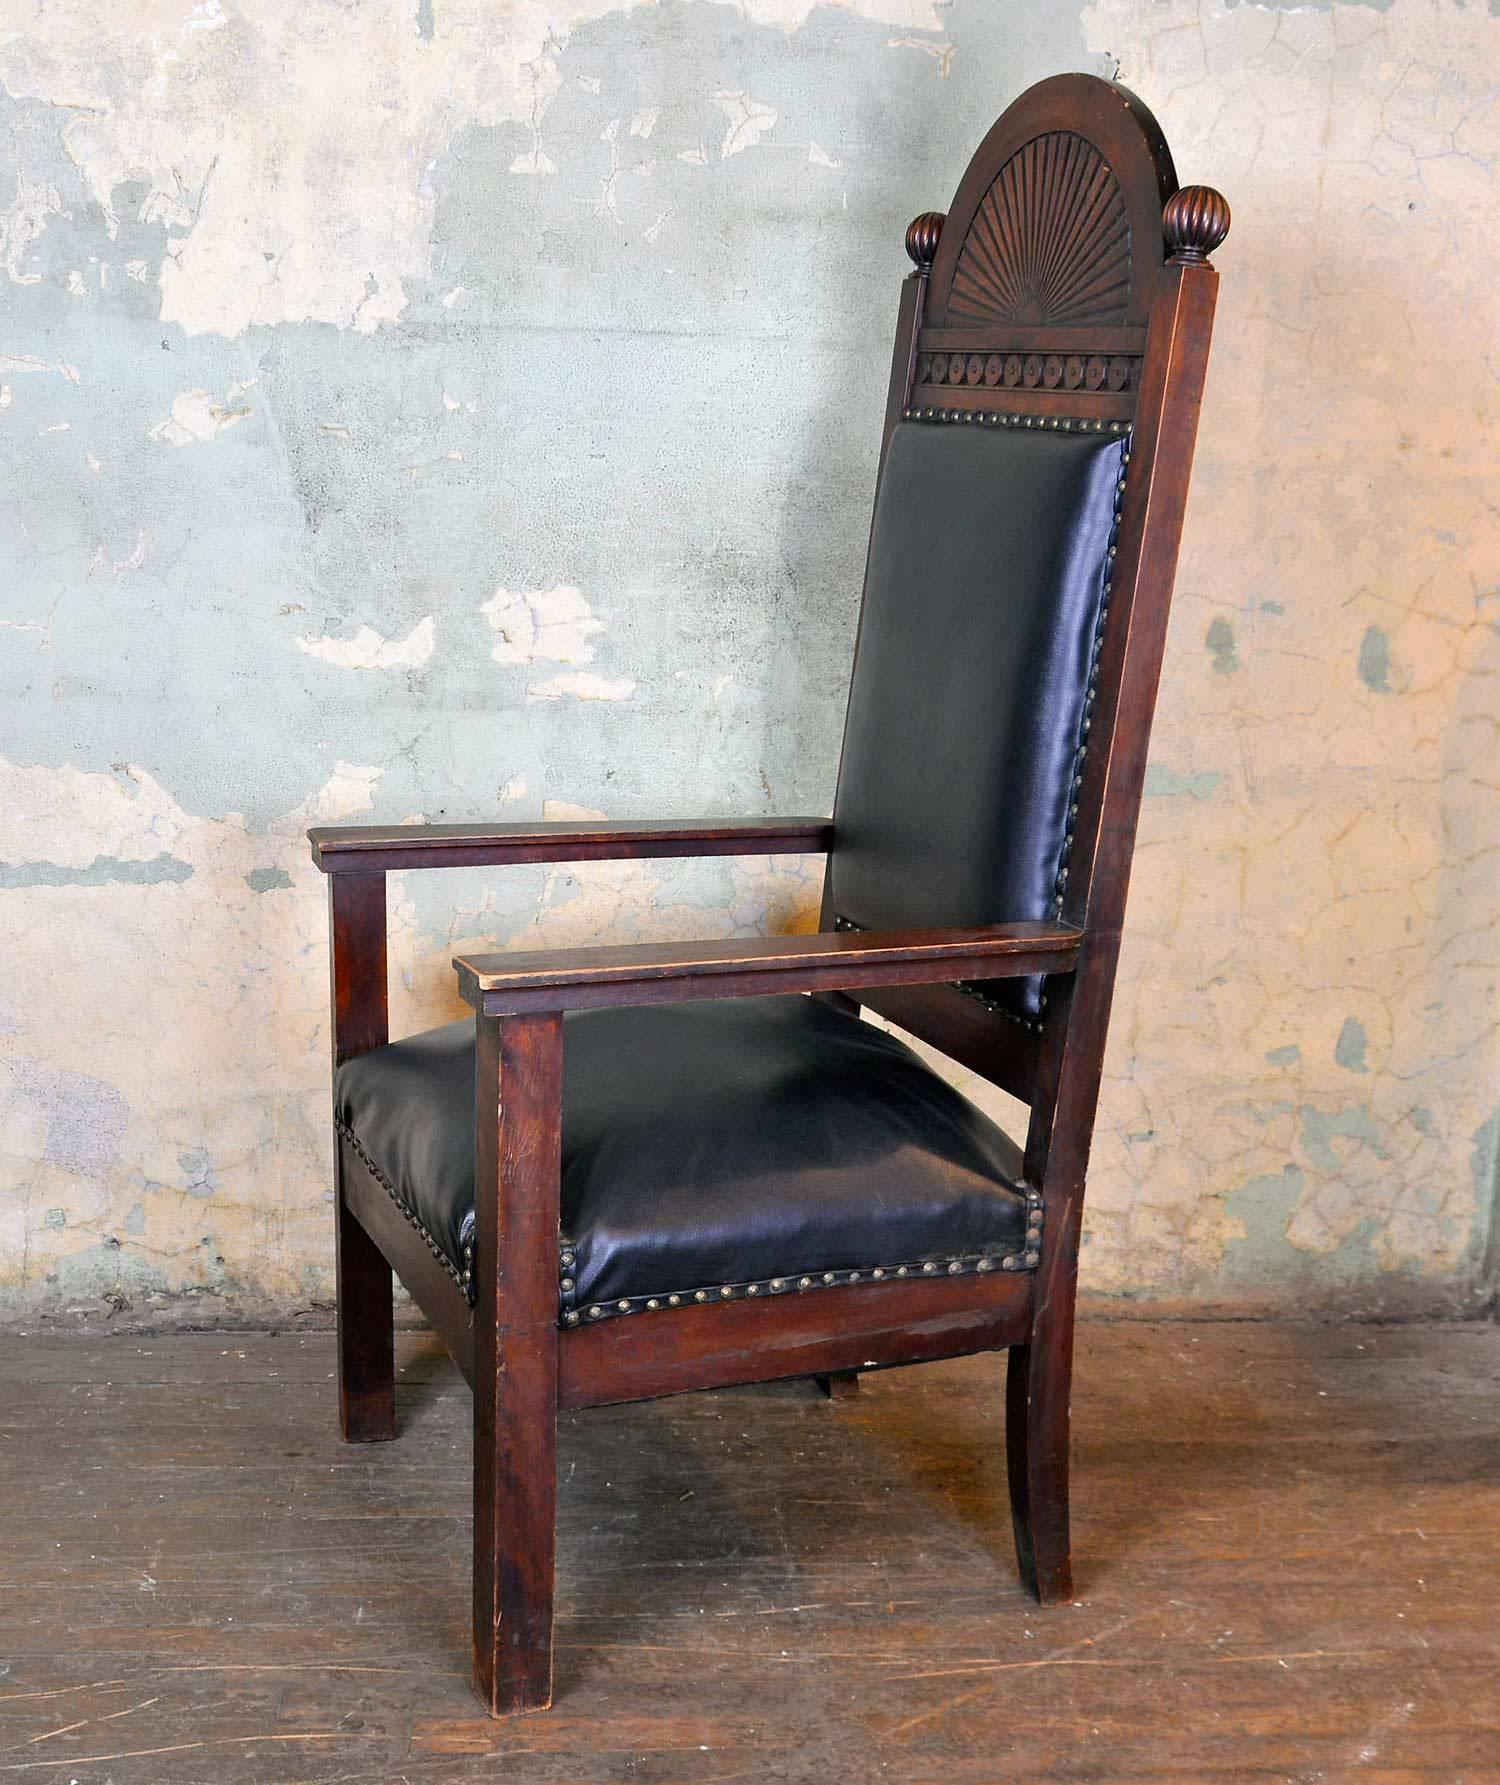 Manufactured by the Shaw Furniture Company of Boston, Massachusetts, these beautiful high-back lodge chairs have a wonderful decorative arched detail carved in walnut. Both chairs vary in size. 

One is 59.75" tall x 27.5" wide x 27"